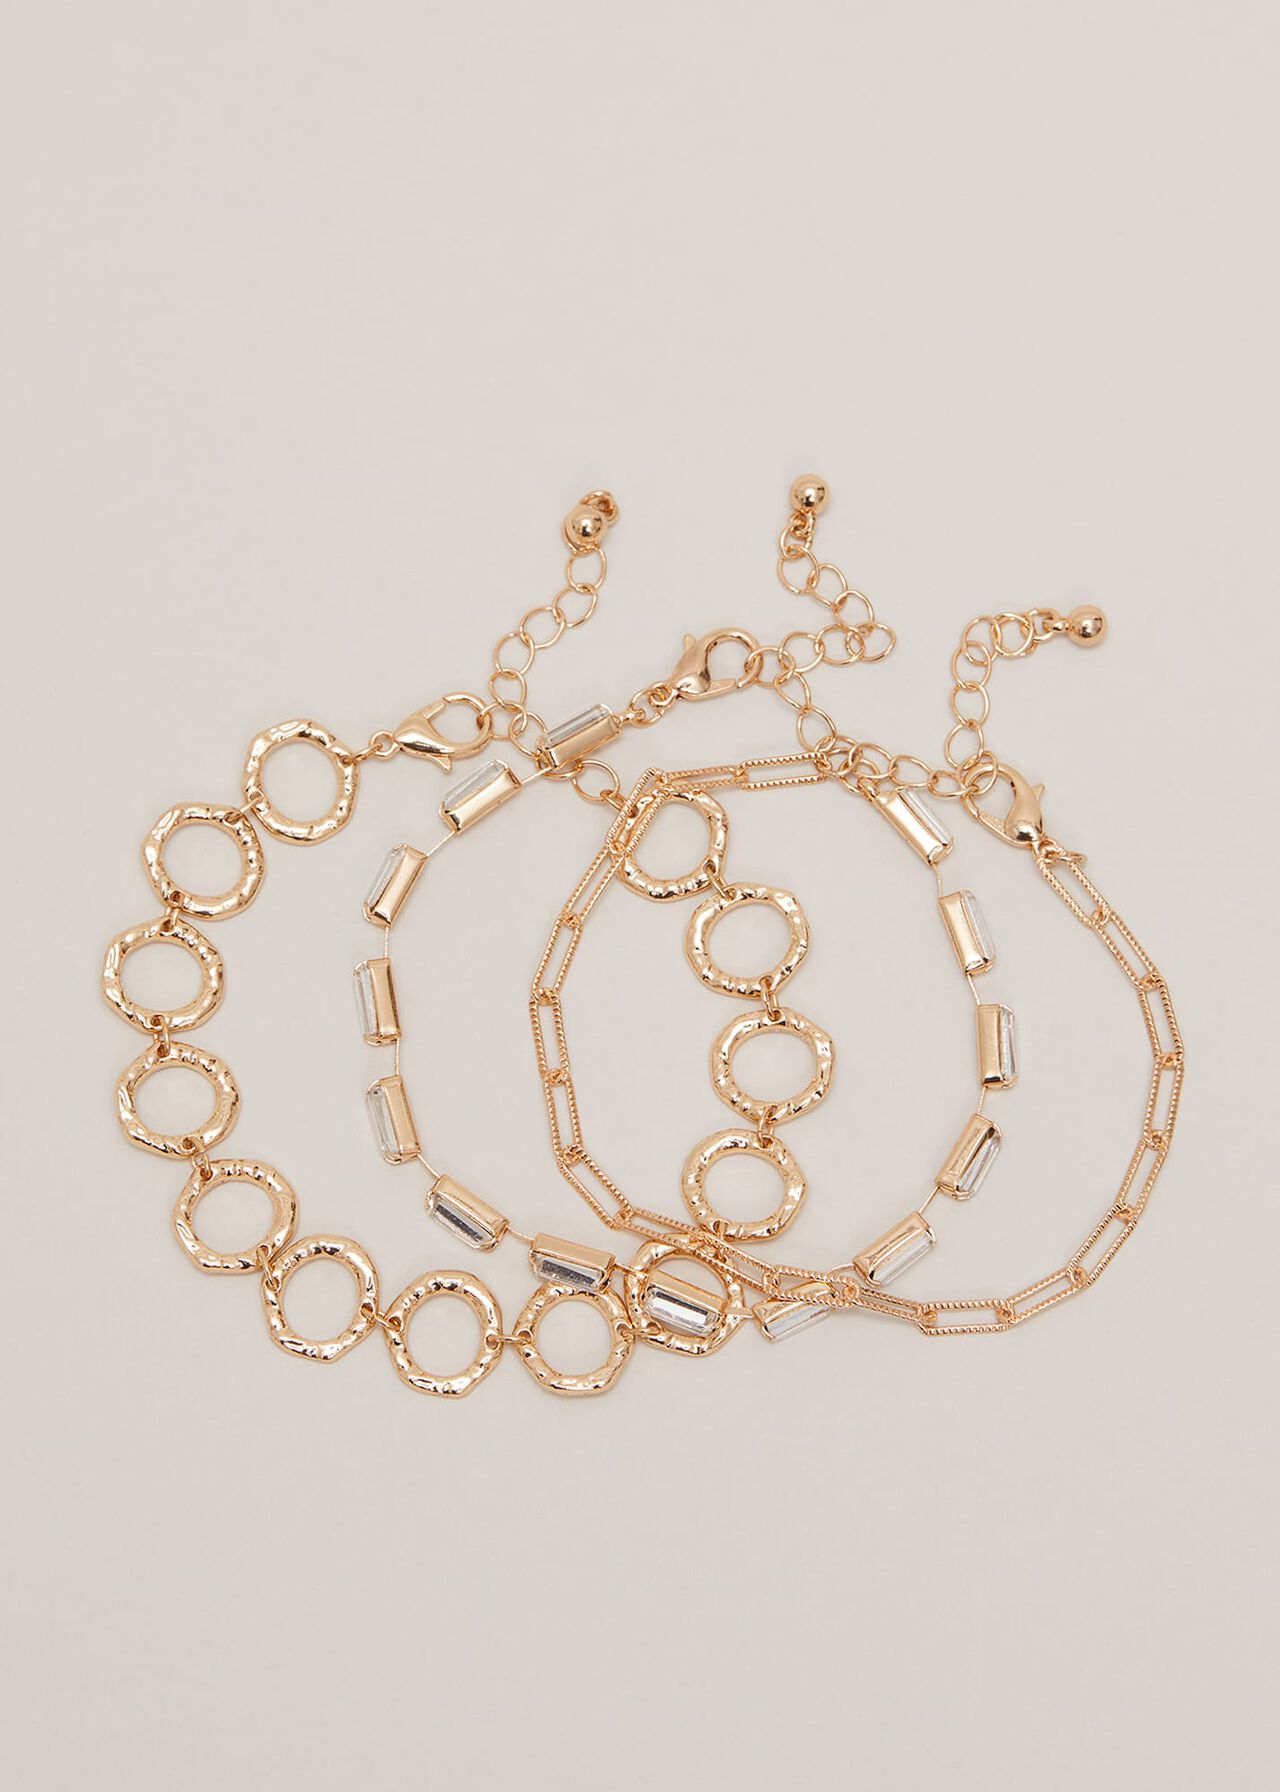 Circle Chain And Crystal Bracelet Set